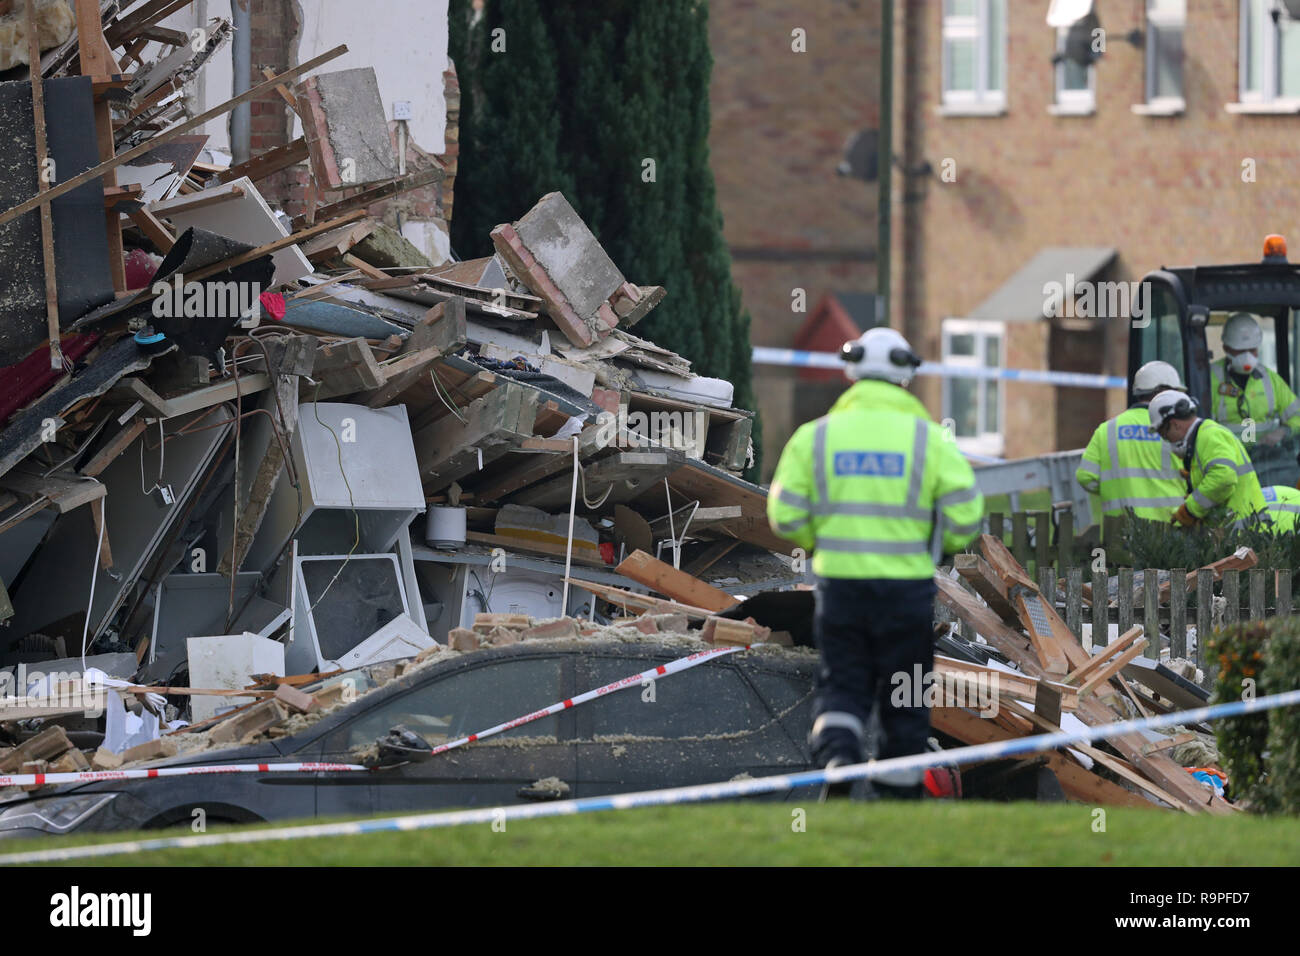 A gas engineer passes a vehicle crushed by debris in Launcelot Close, Andover, where Hampshire Police say that the body of a man has been found after an explosion caused a building to collapse this morning. Stock Photo